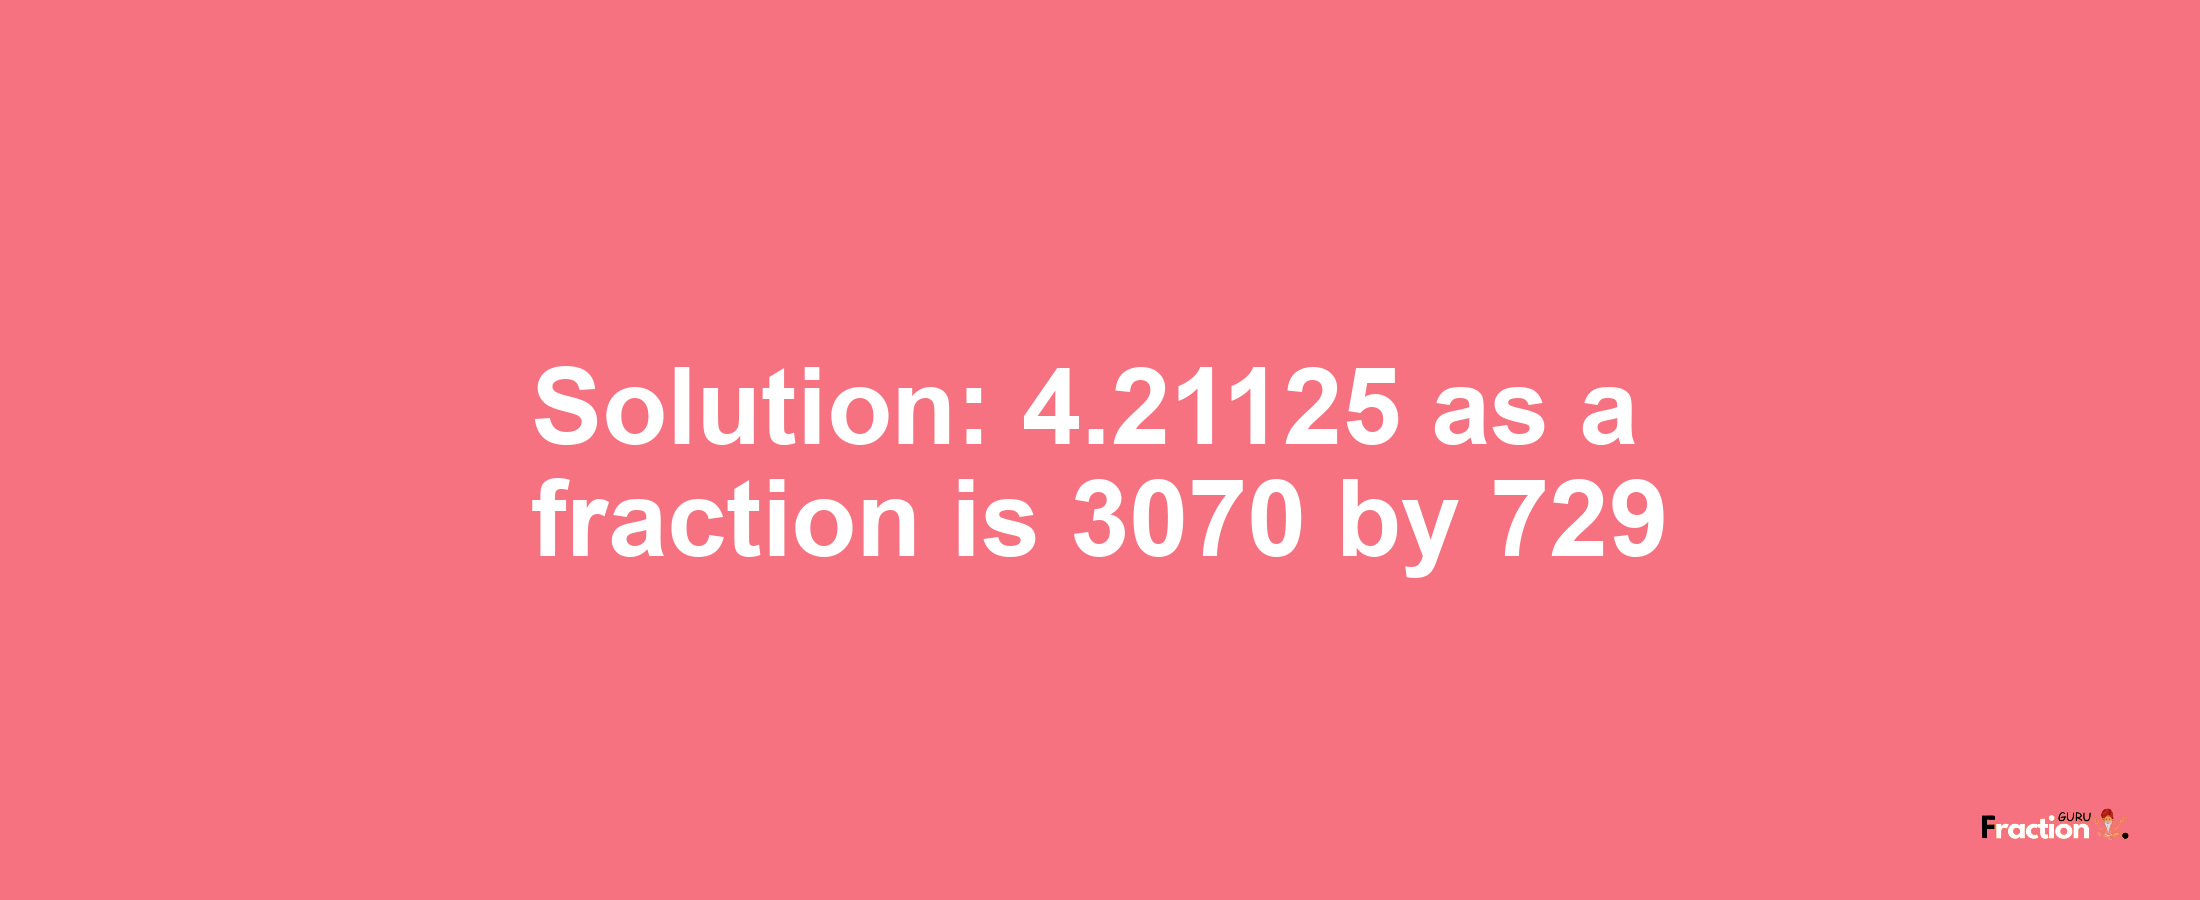 Solution:4.21125 as a fraction is 3070/729